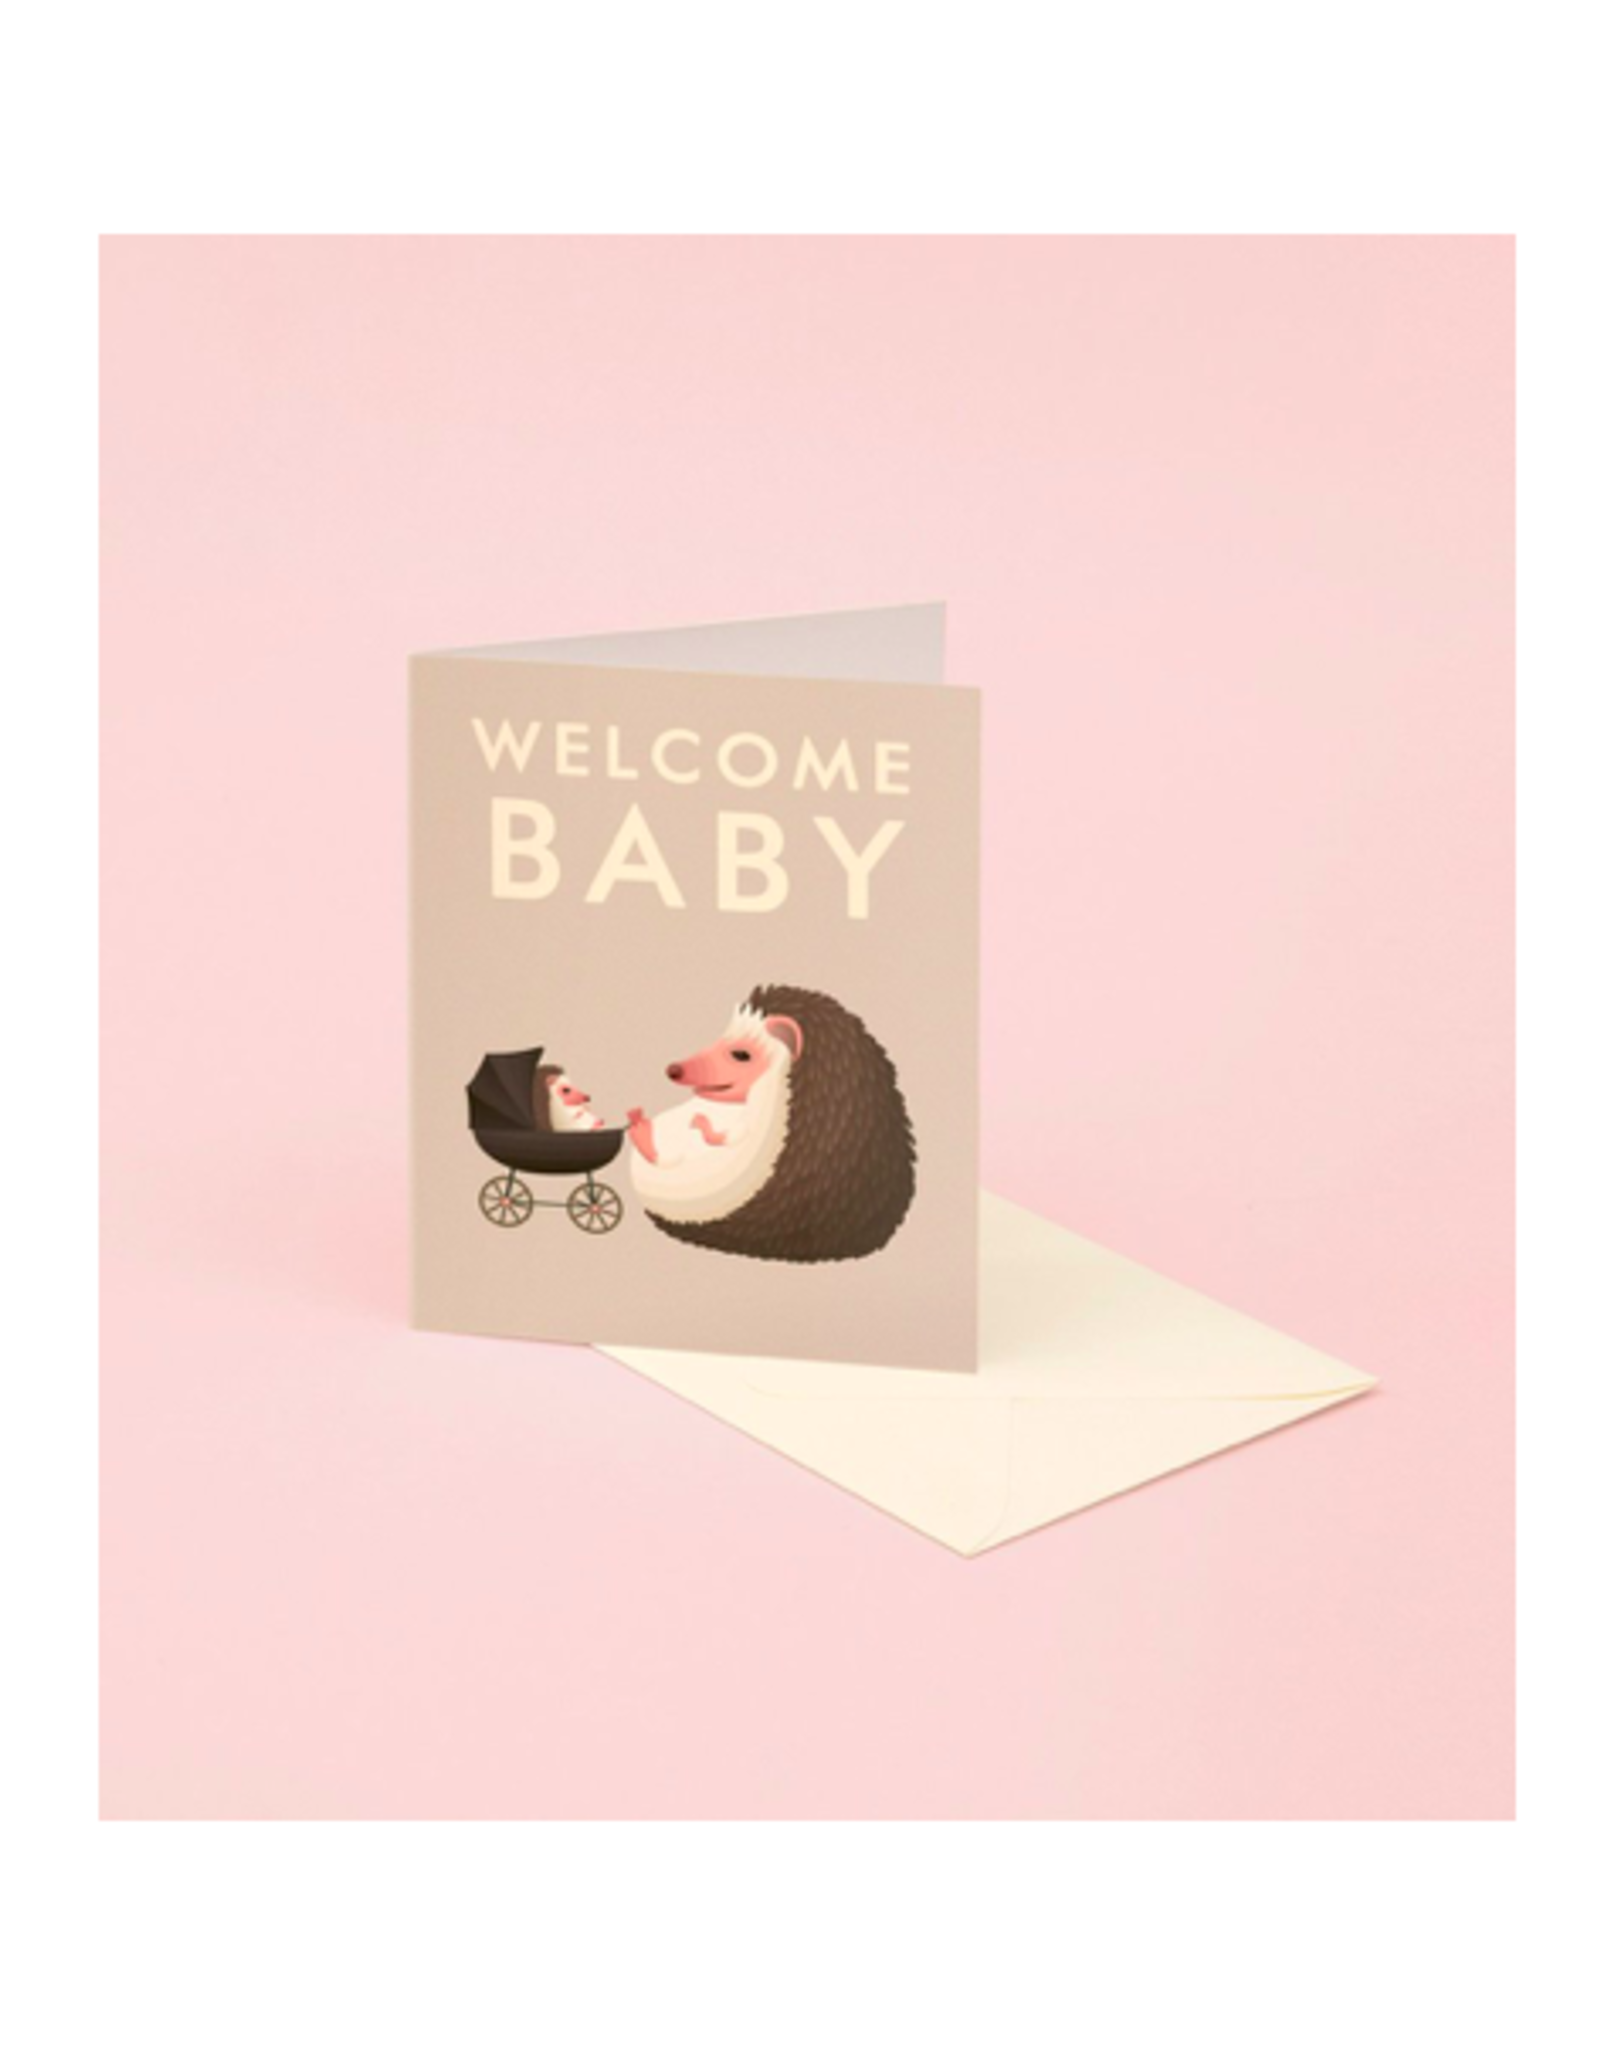 TIMCo CAP - Card / Welcome Baby, 4.25 x 5.5"